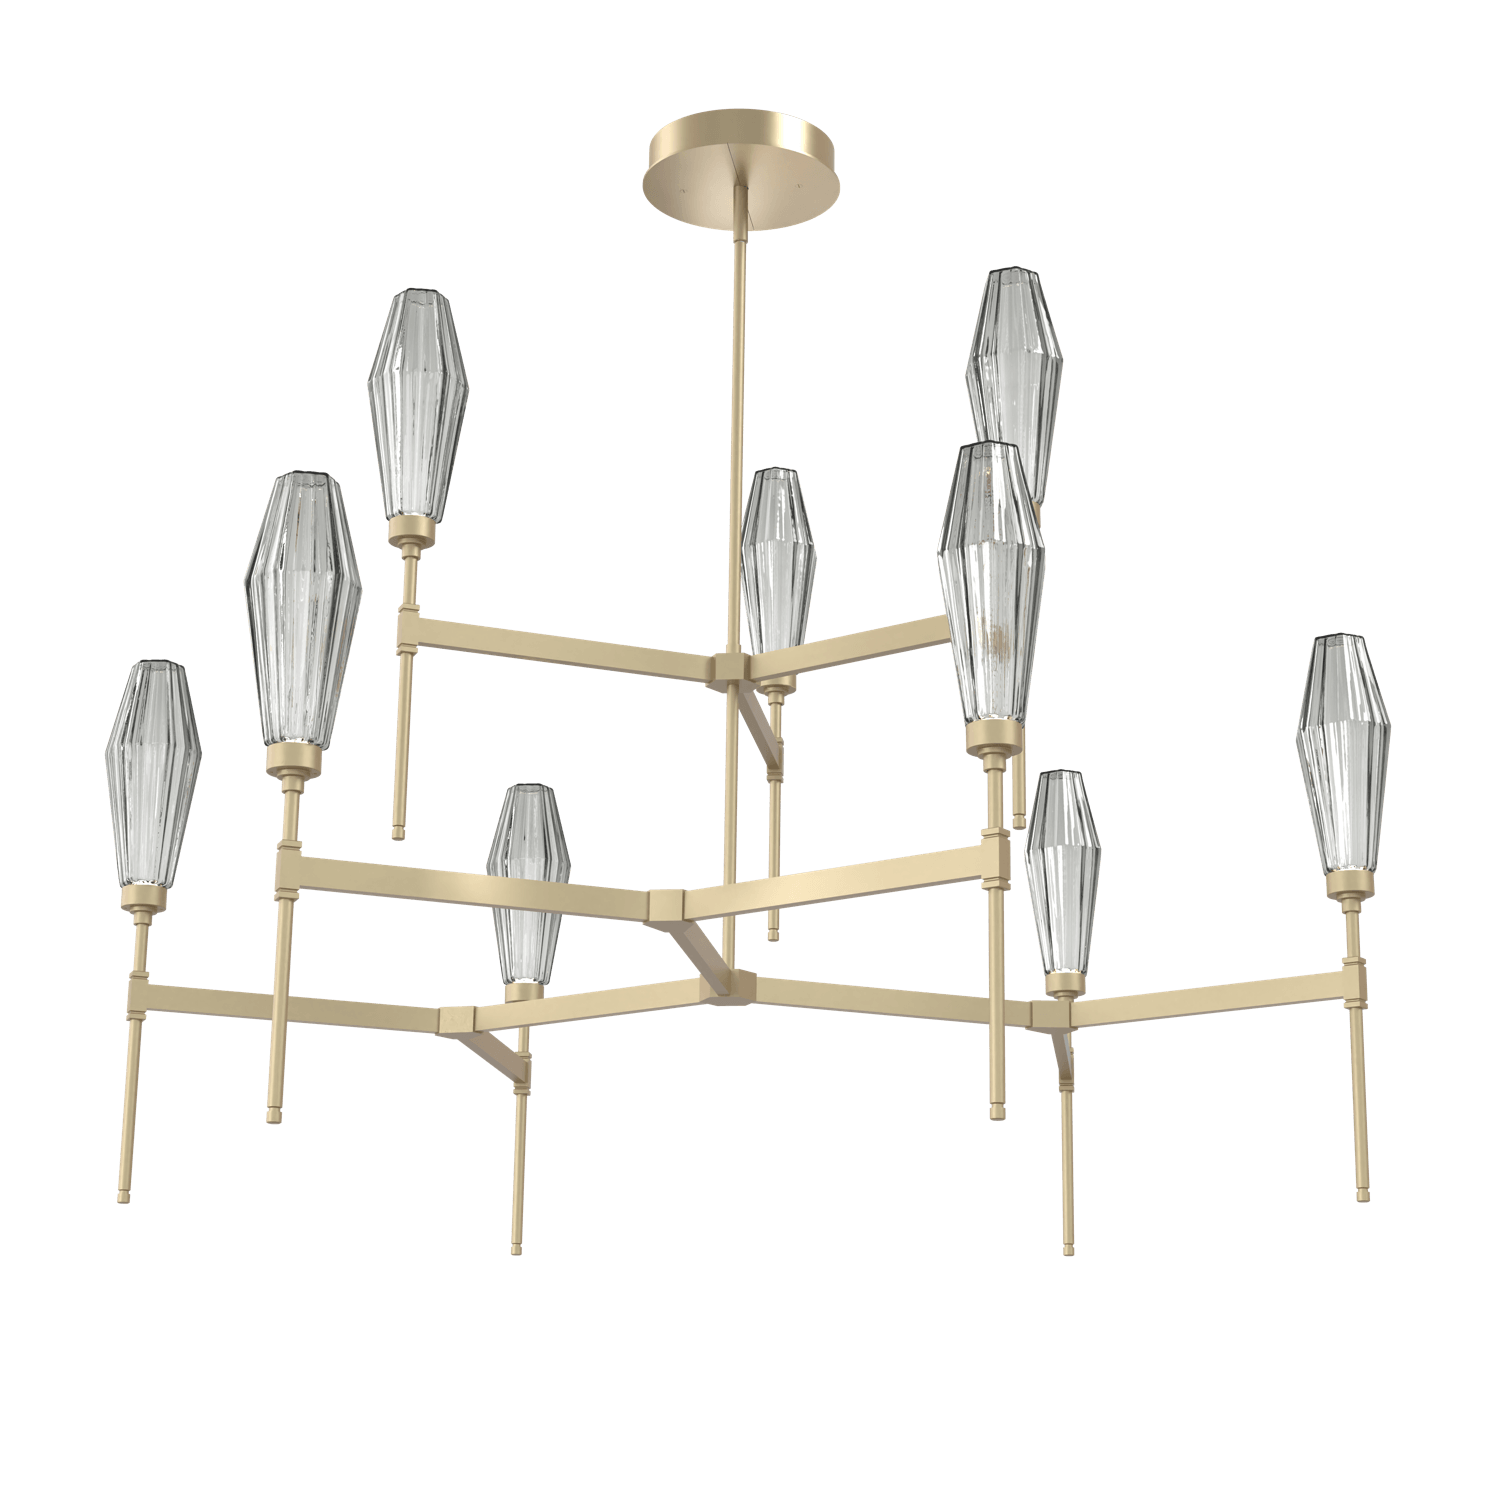 CHB0049-54-GB-RS-Hammerton-Studio-Aalto-54-inch-round-two-tier-belvedere-chandelier-with-gilded-brass-finish-and-optic-ribbed-smoke-glass-shades-and-LED-lamping